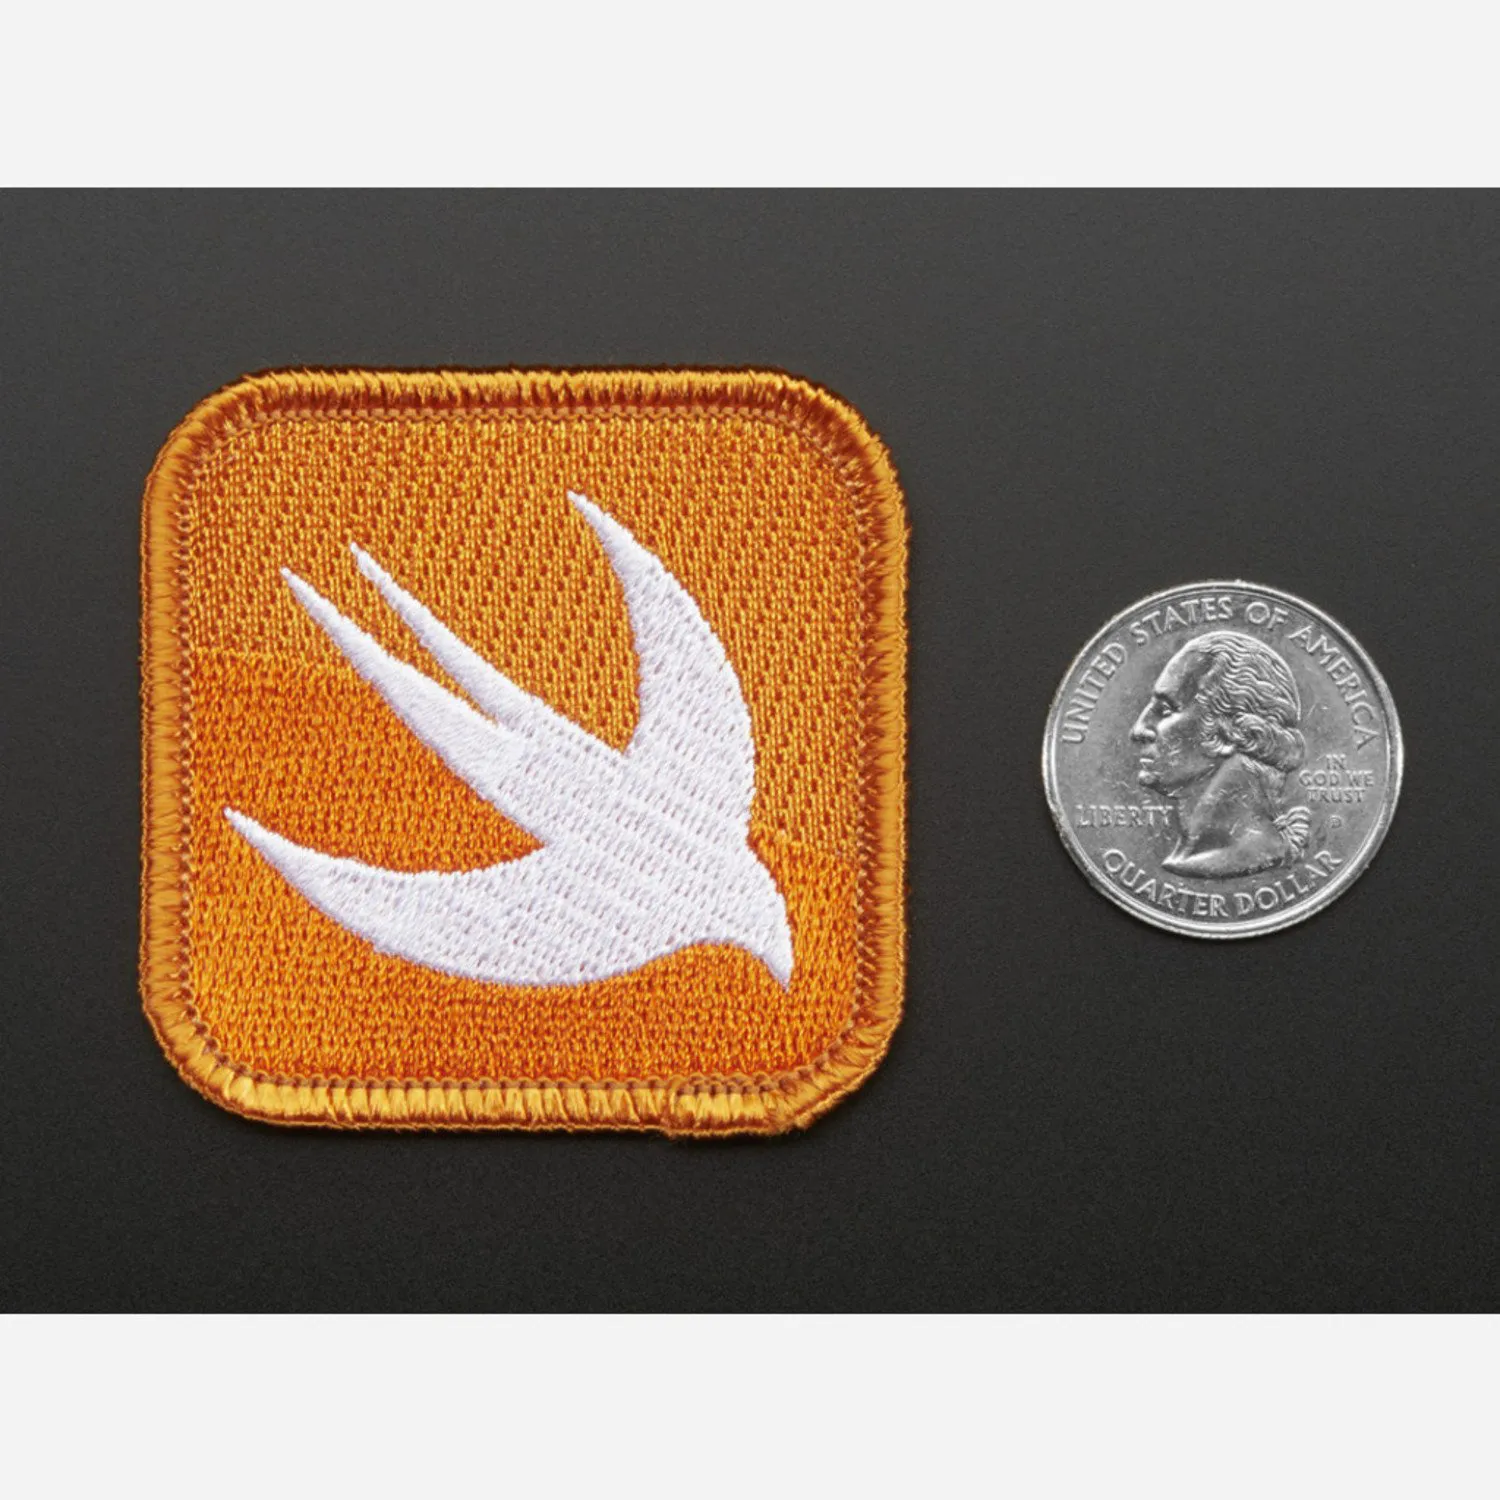 Photo of Swift - Skill badge, iron-on patch